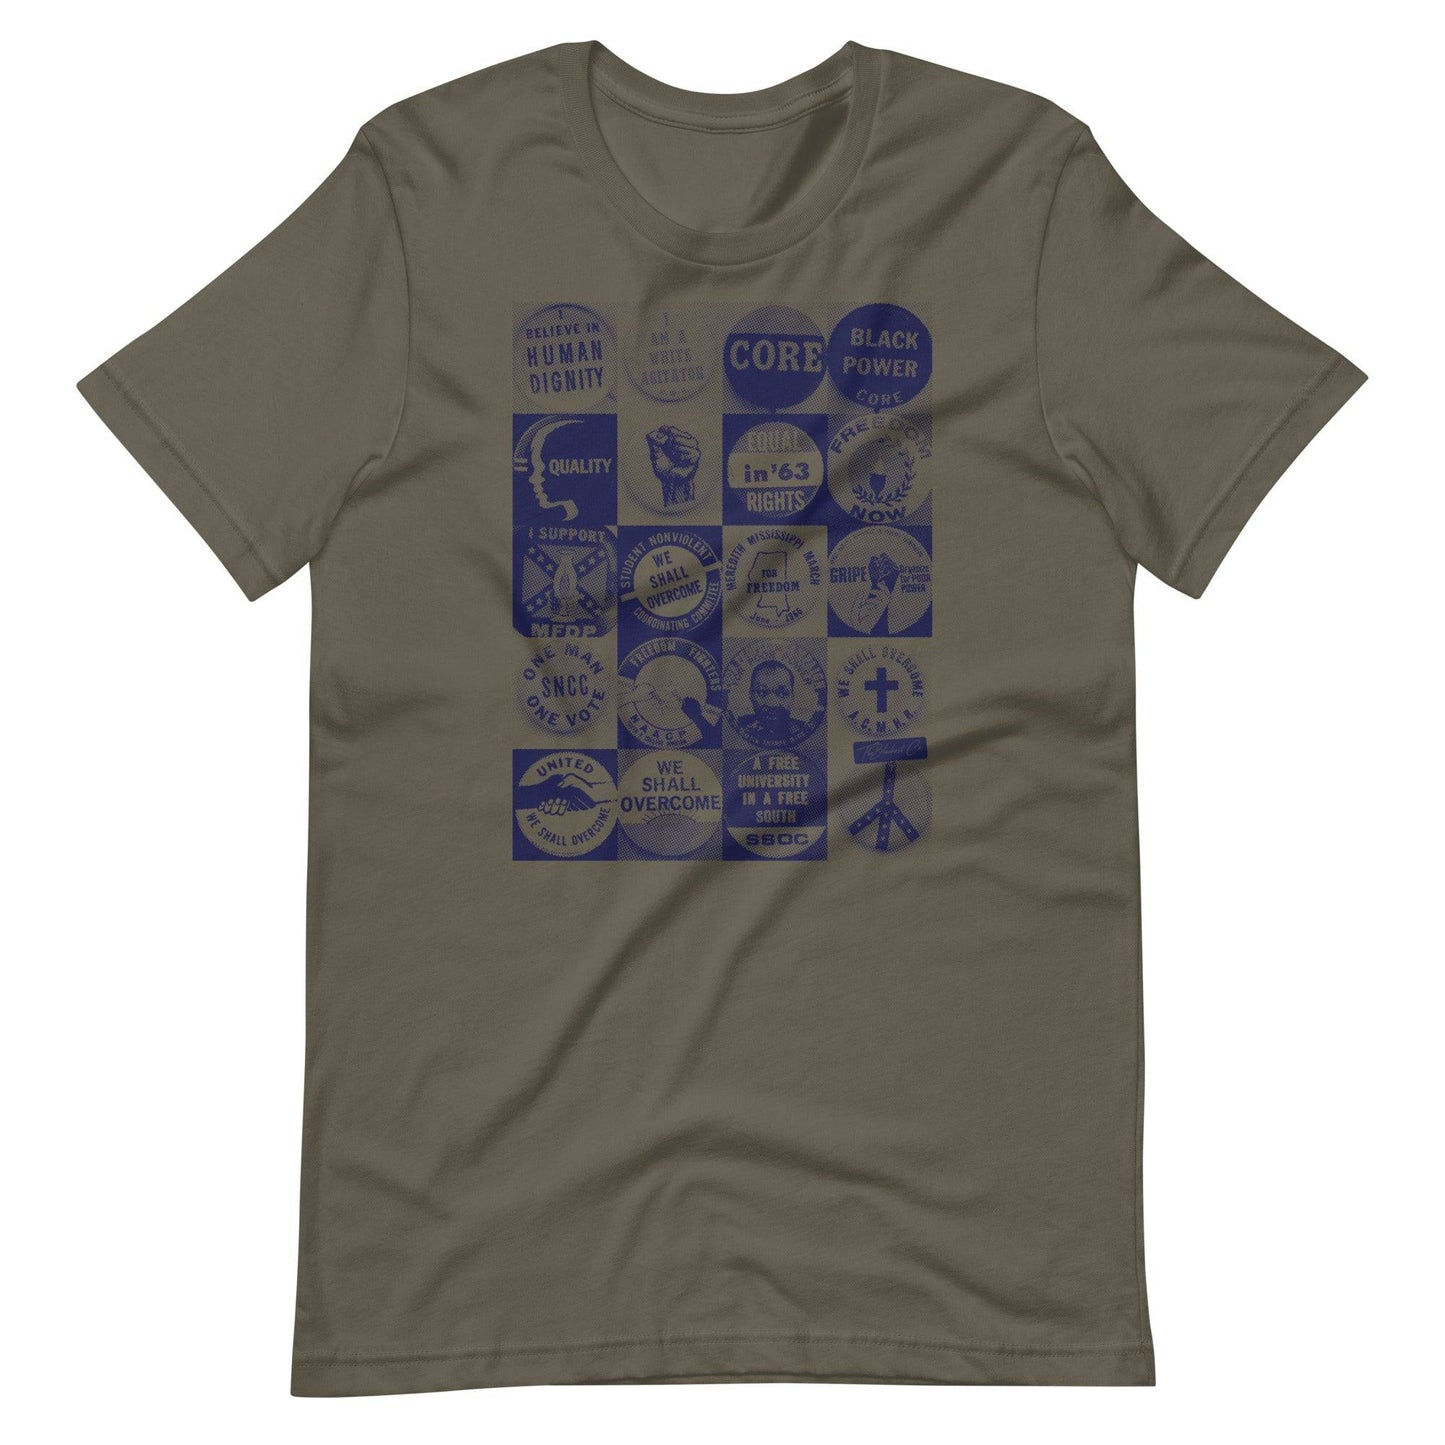 a t - shirt with a bunch of civil rights buttons graphics on it